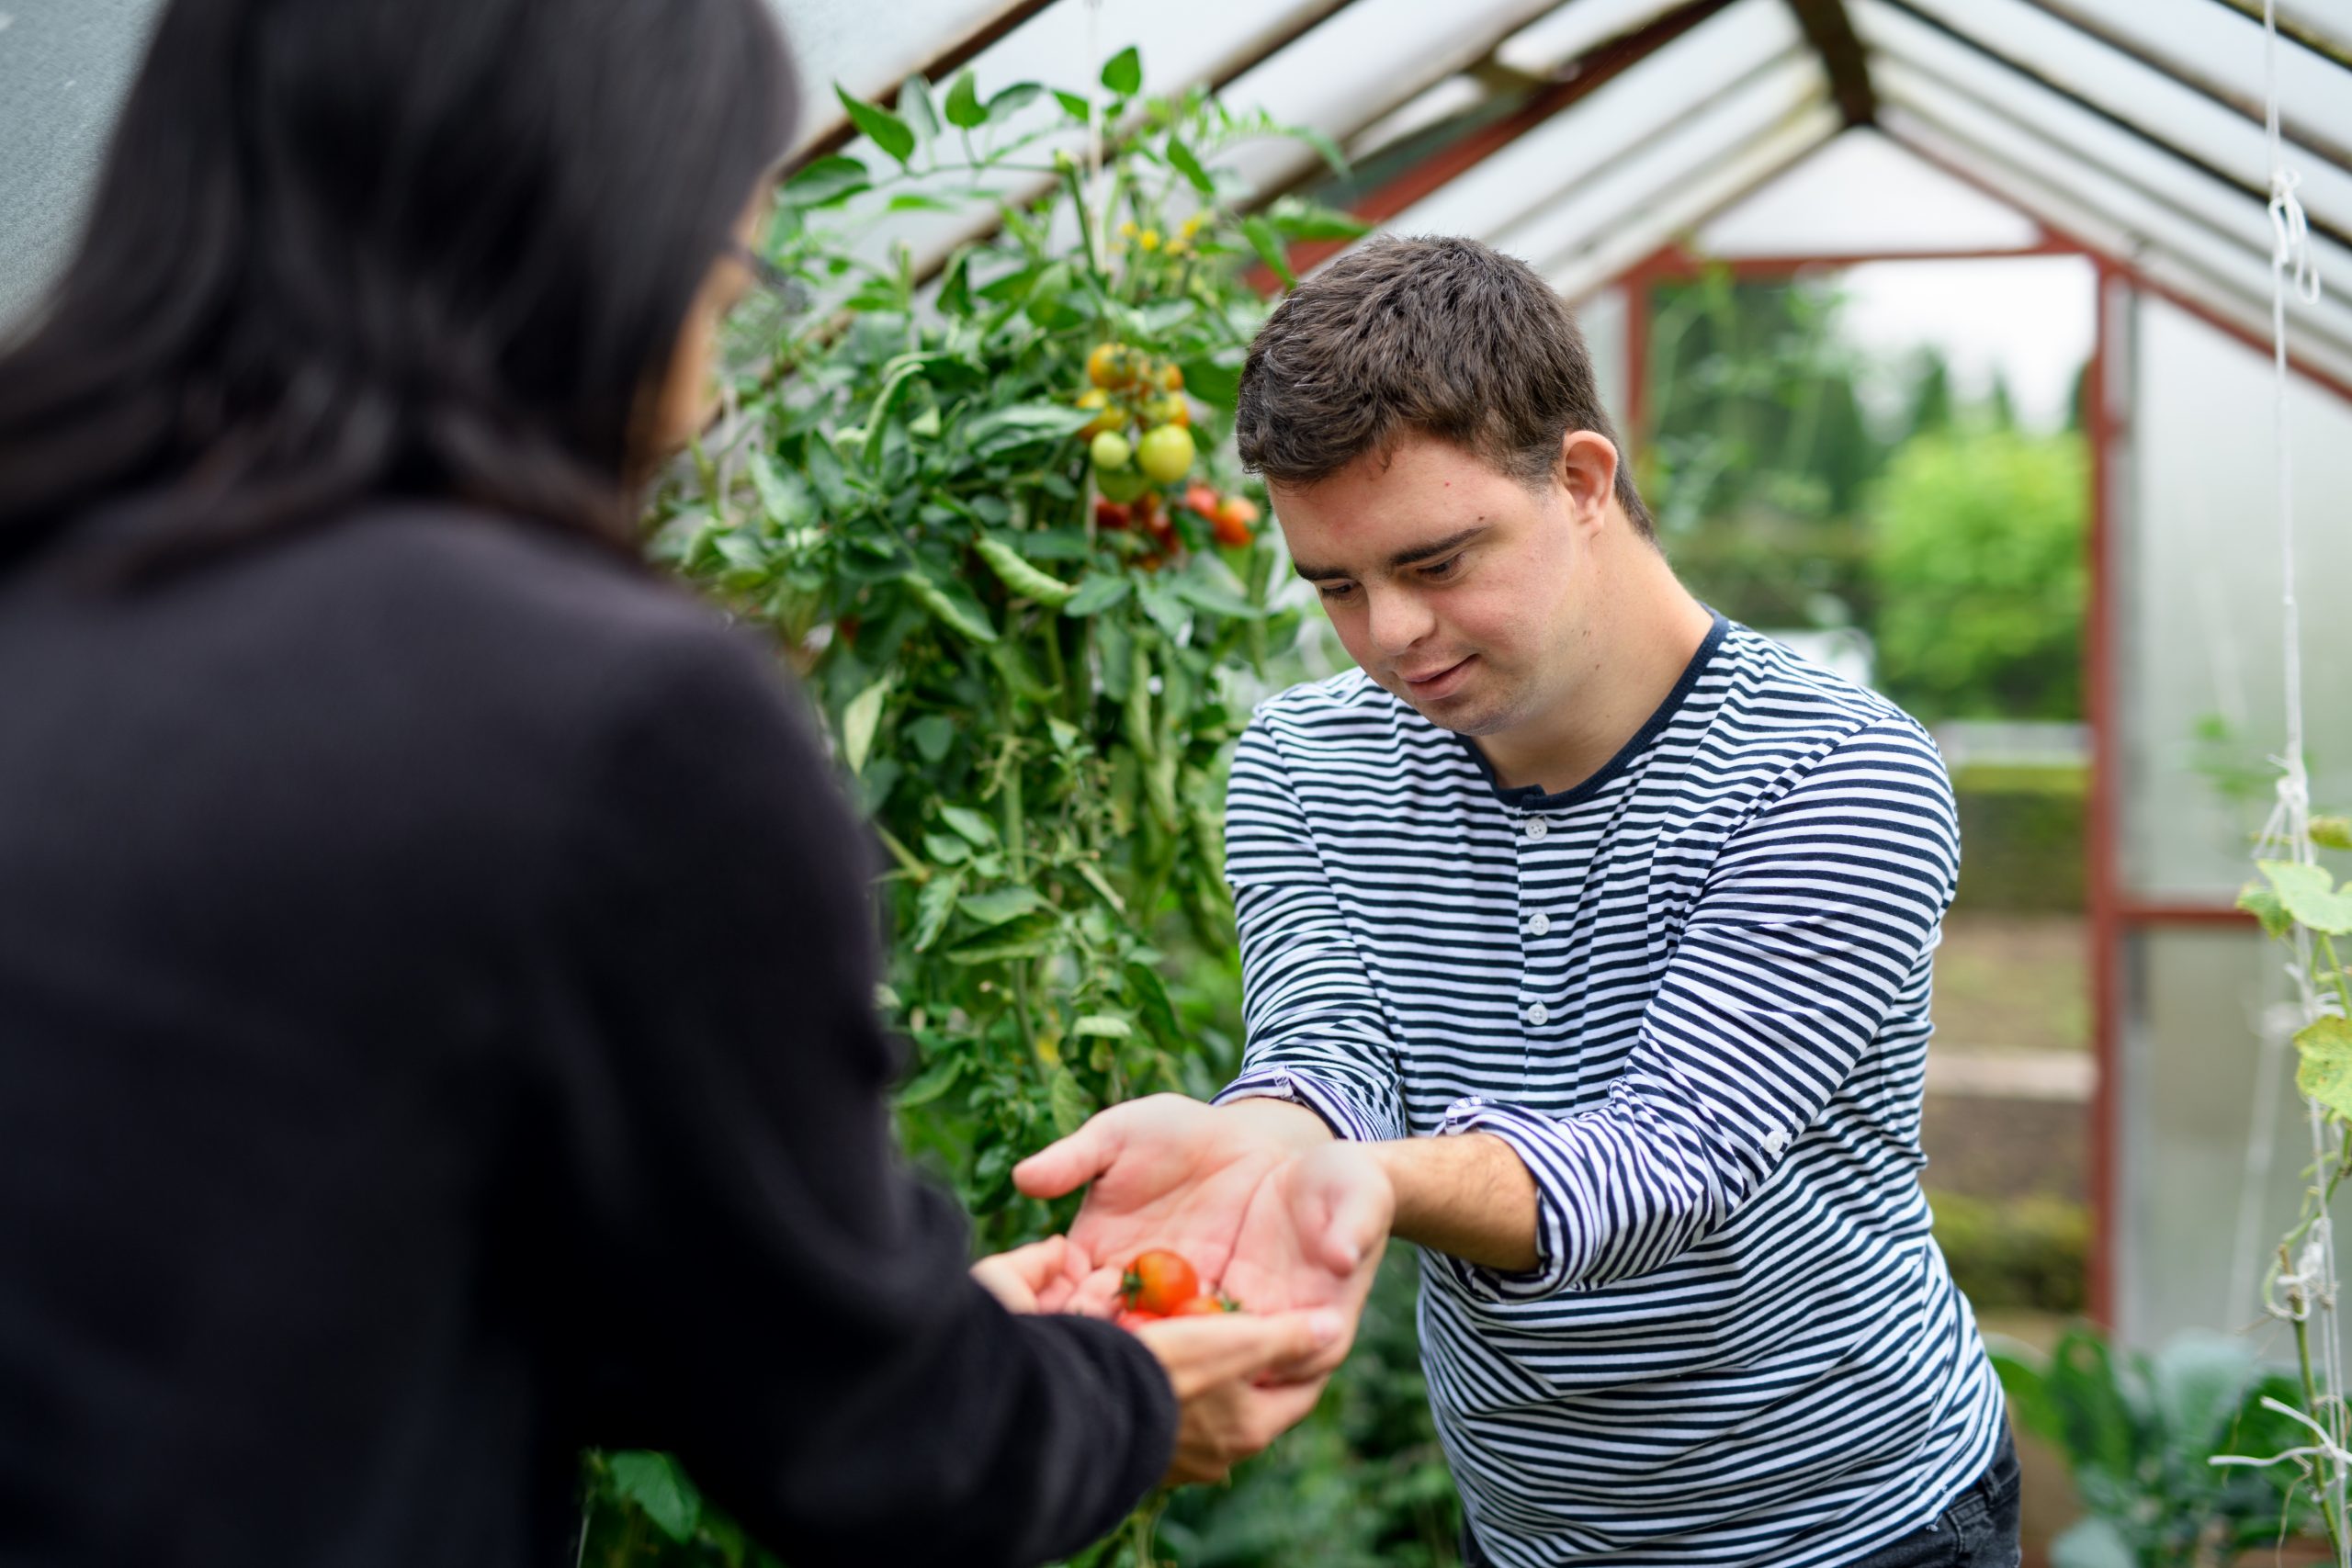 Down syndrome adult man gathering tomatoes in greenhouse, gardening concept.